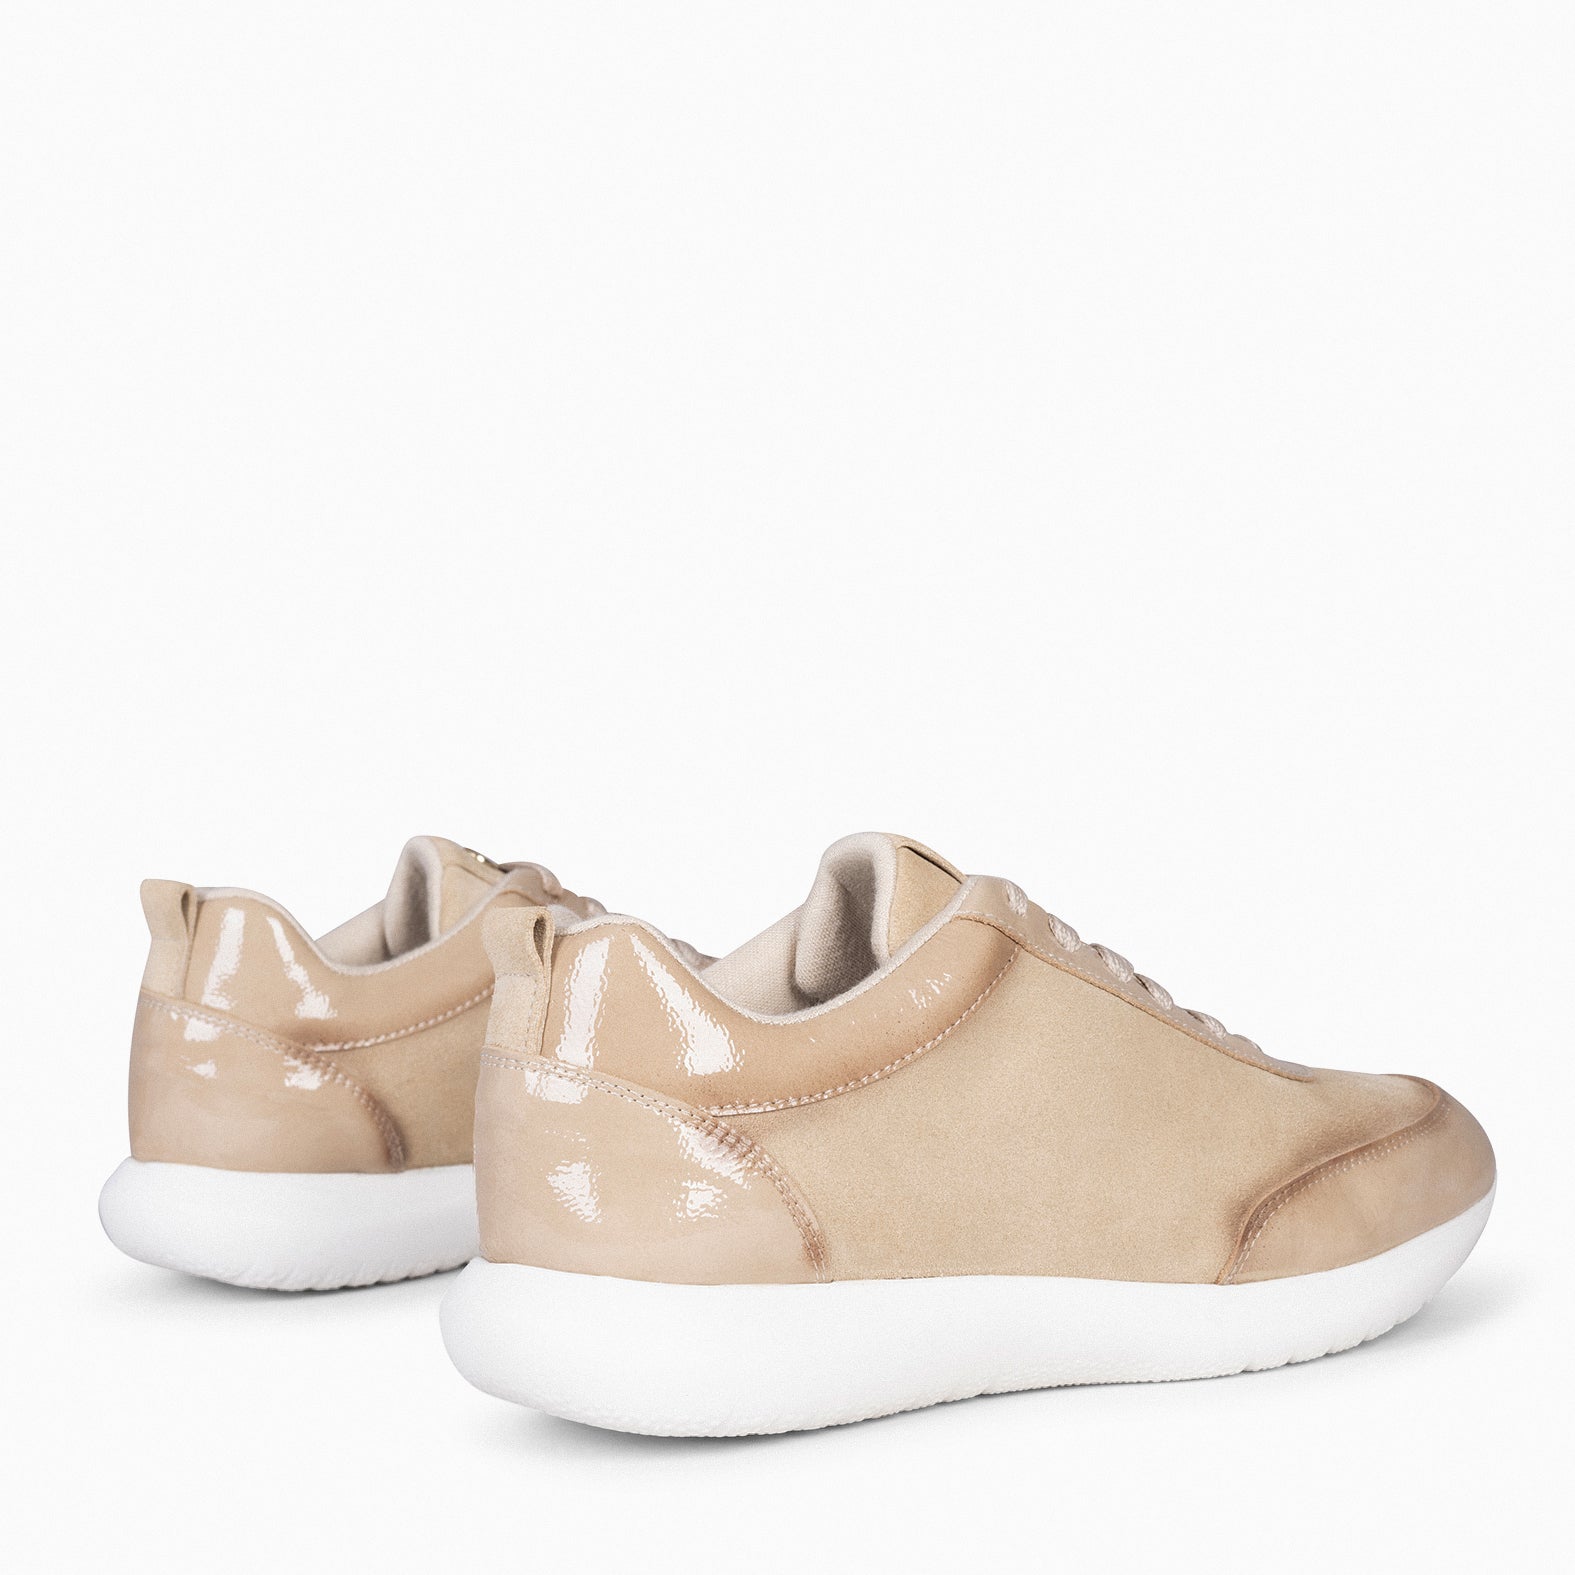 LOIRA - BEIGE Sneakers with Patent Leather